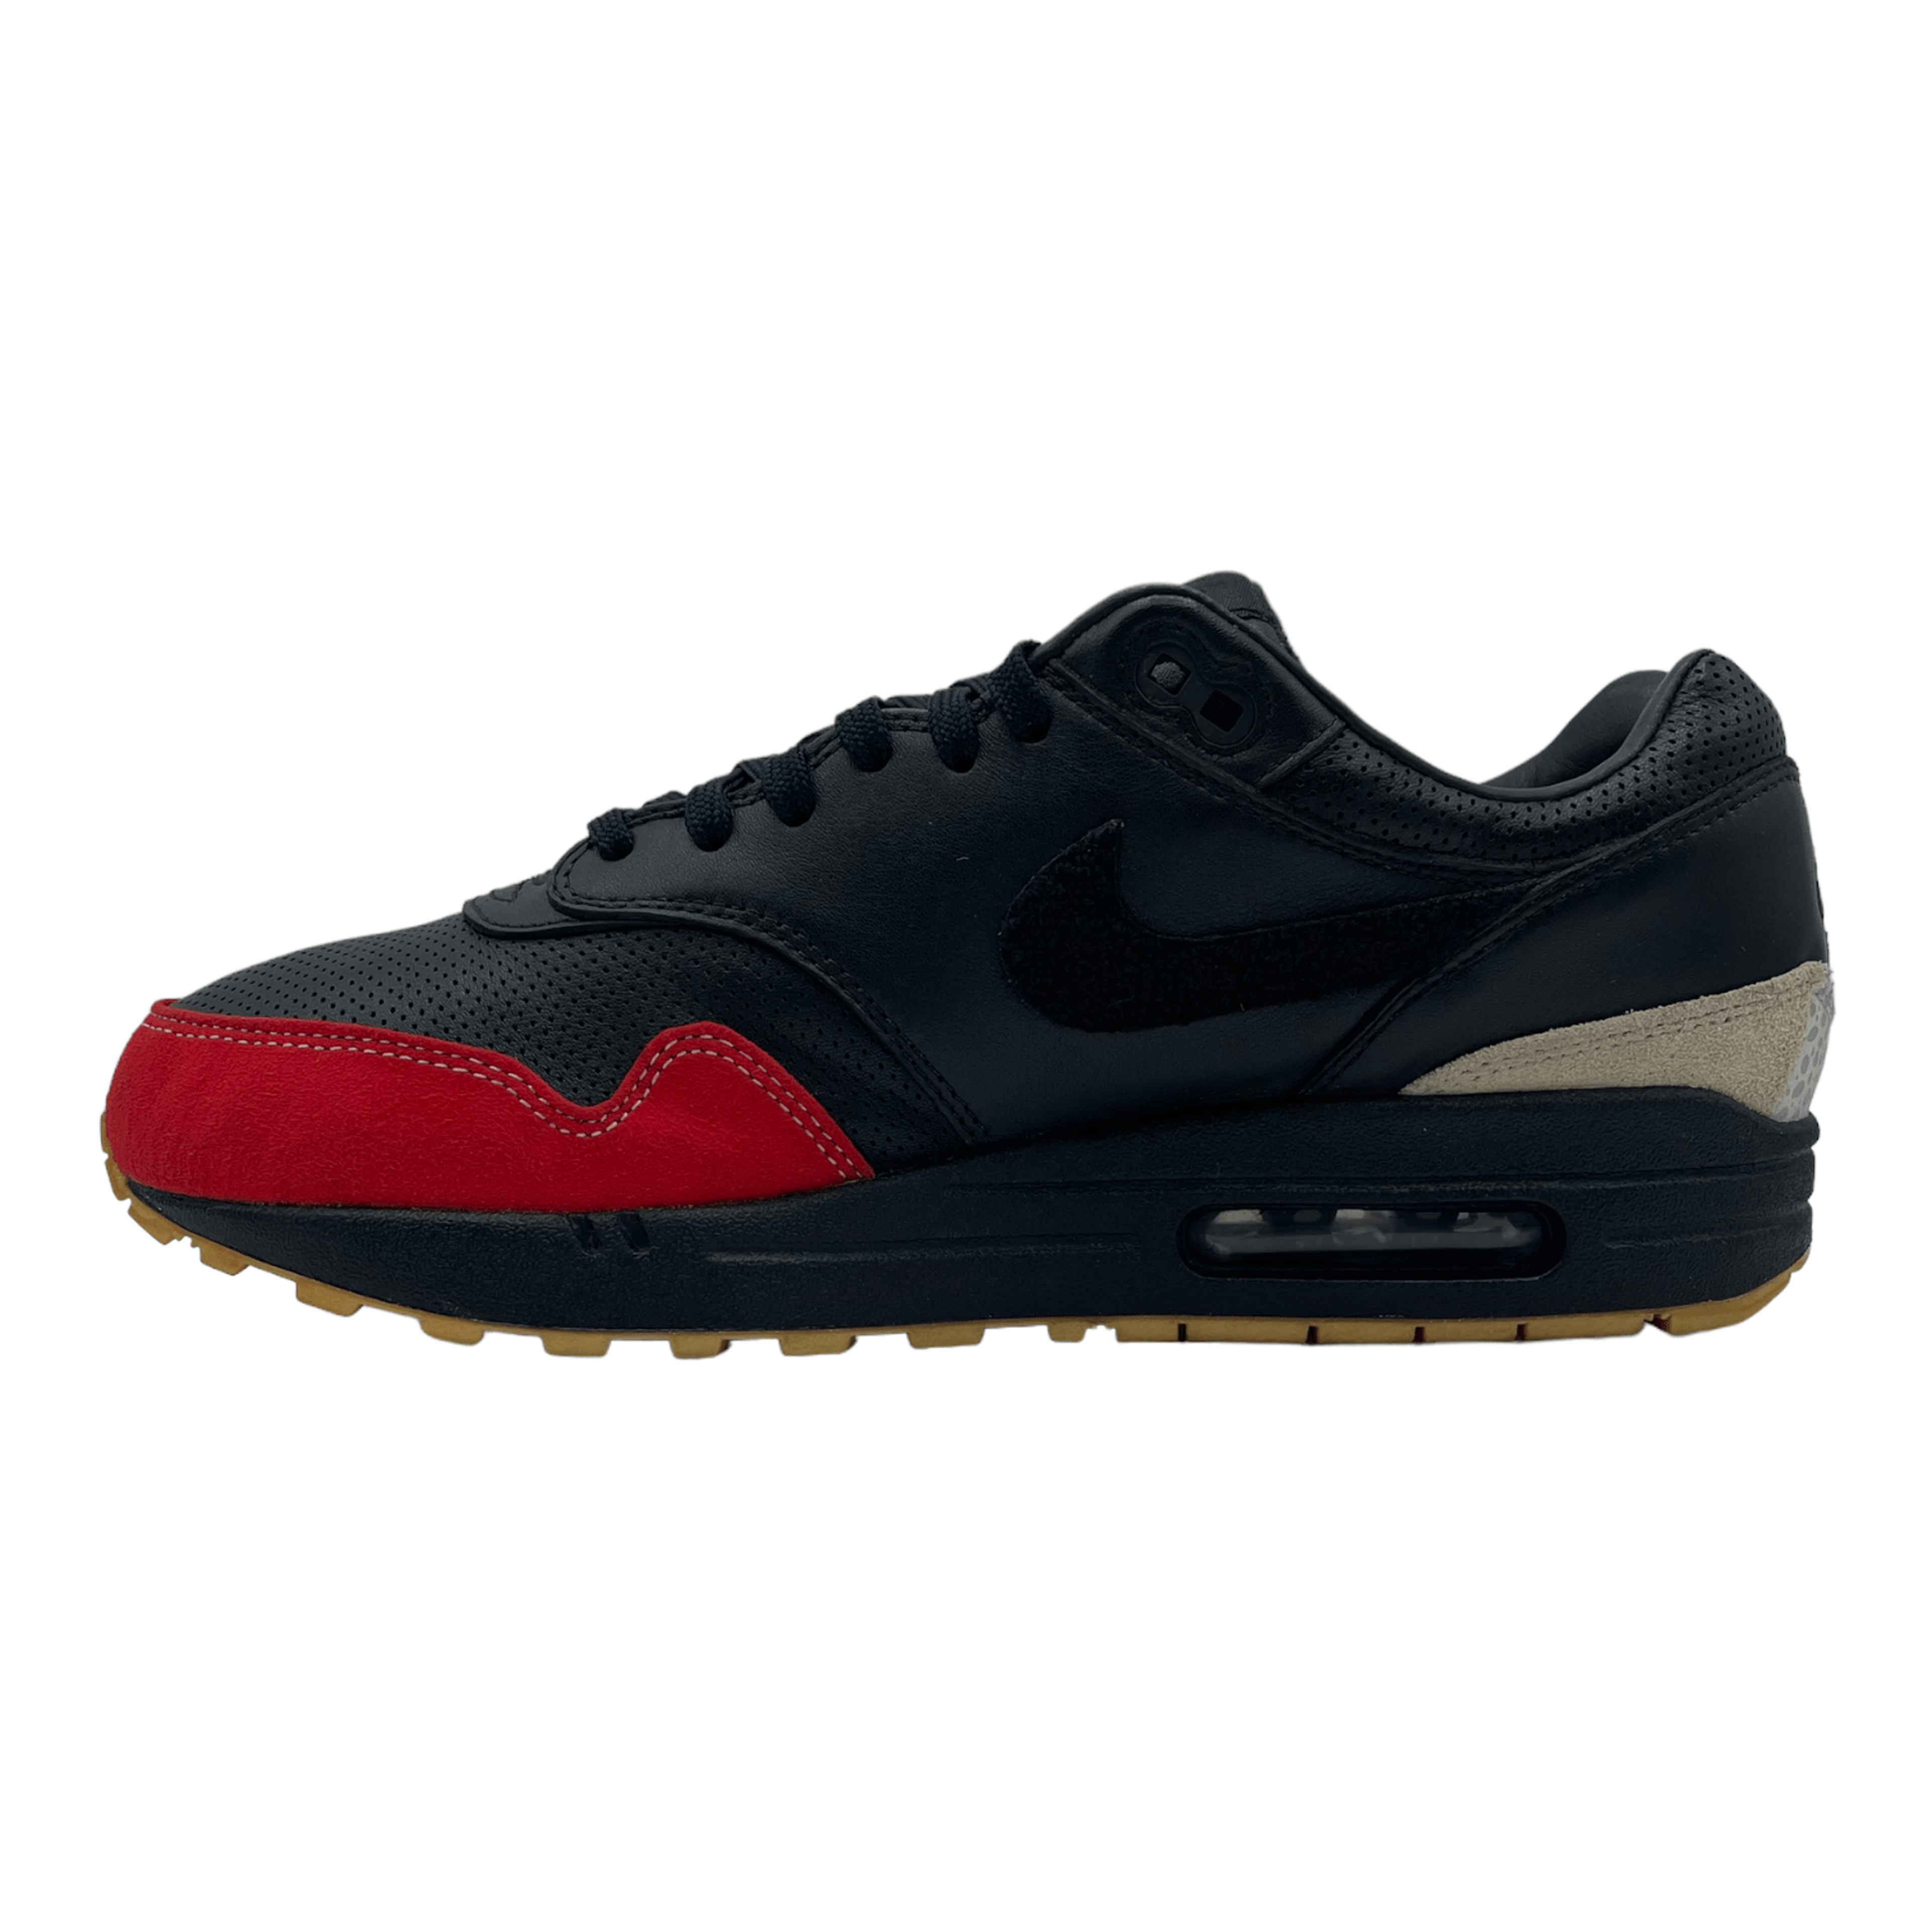 Alternate View 2 of Nike Air Max 1 Master Pre-Owned